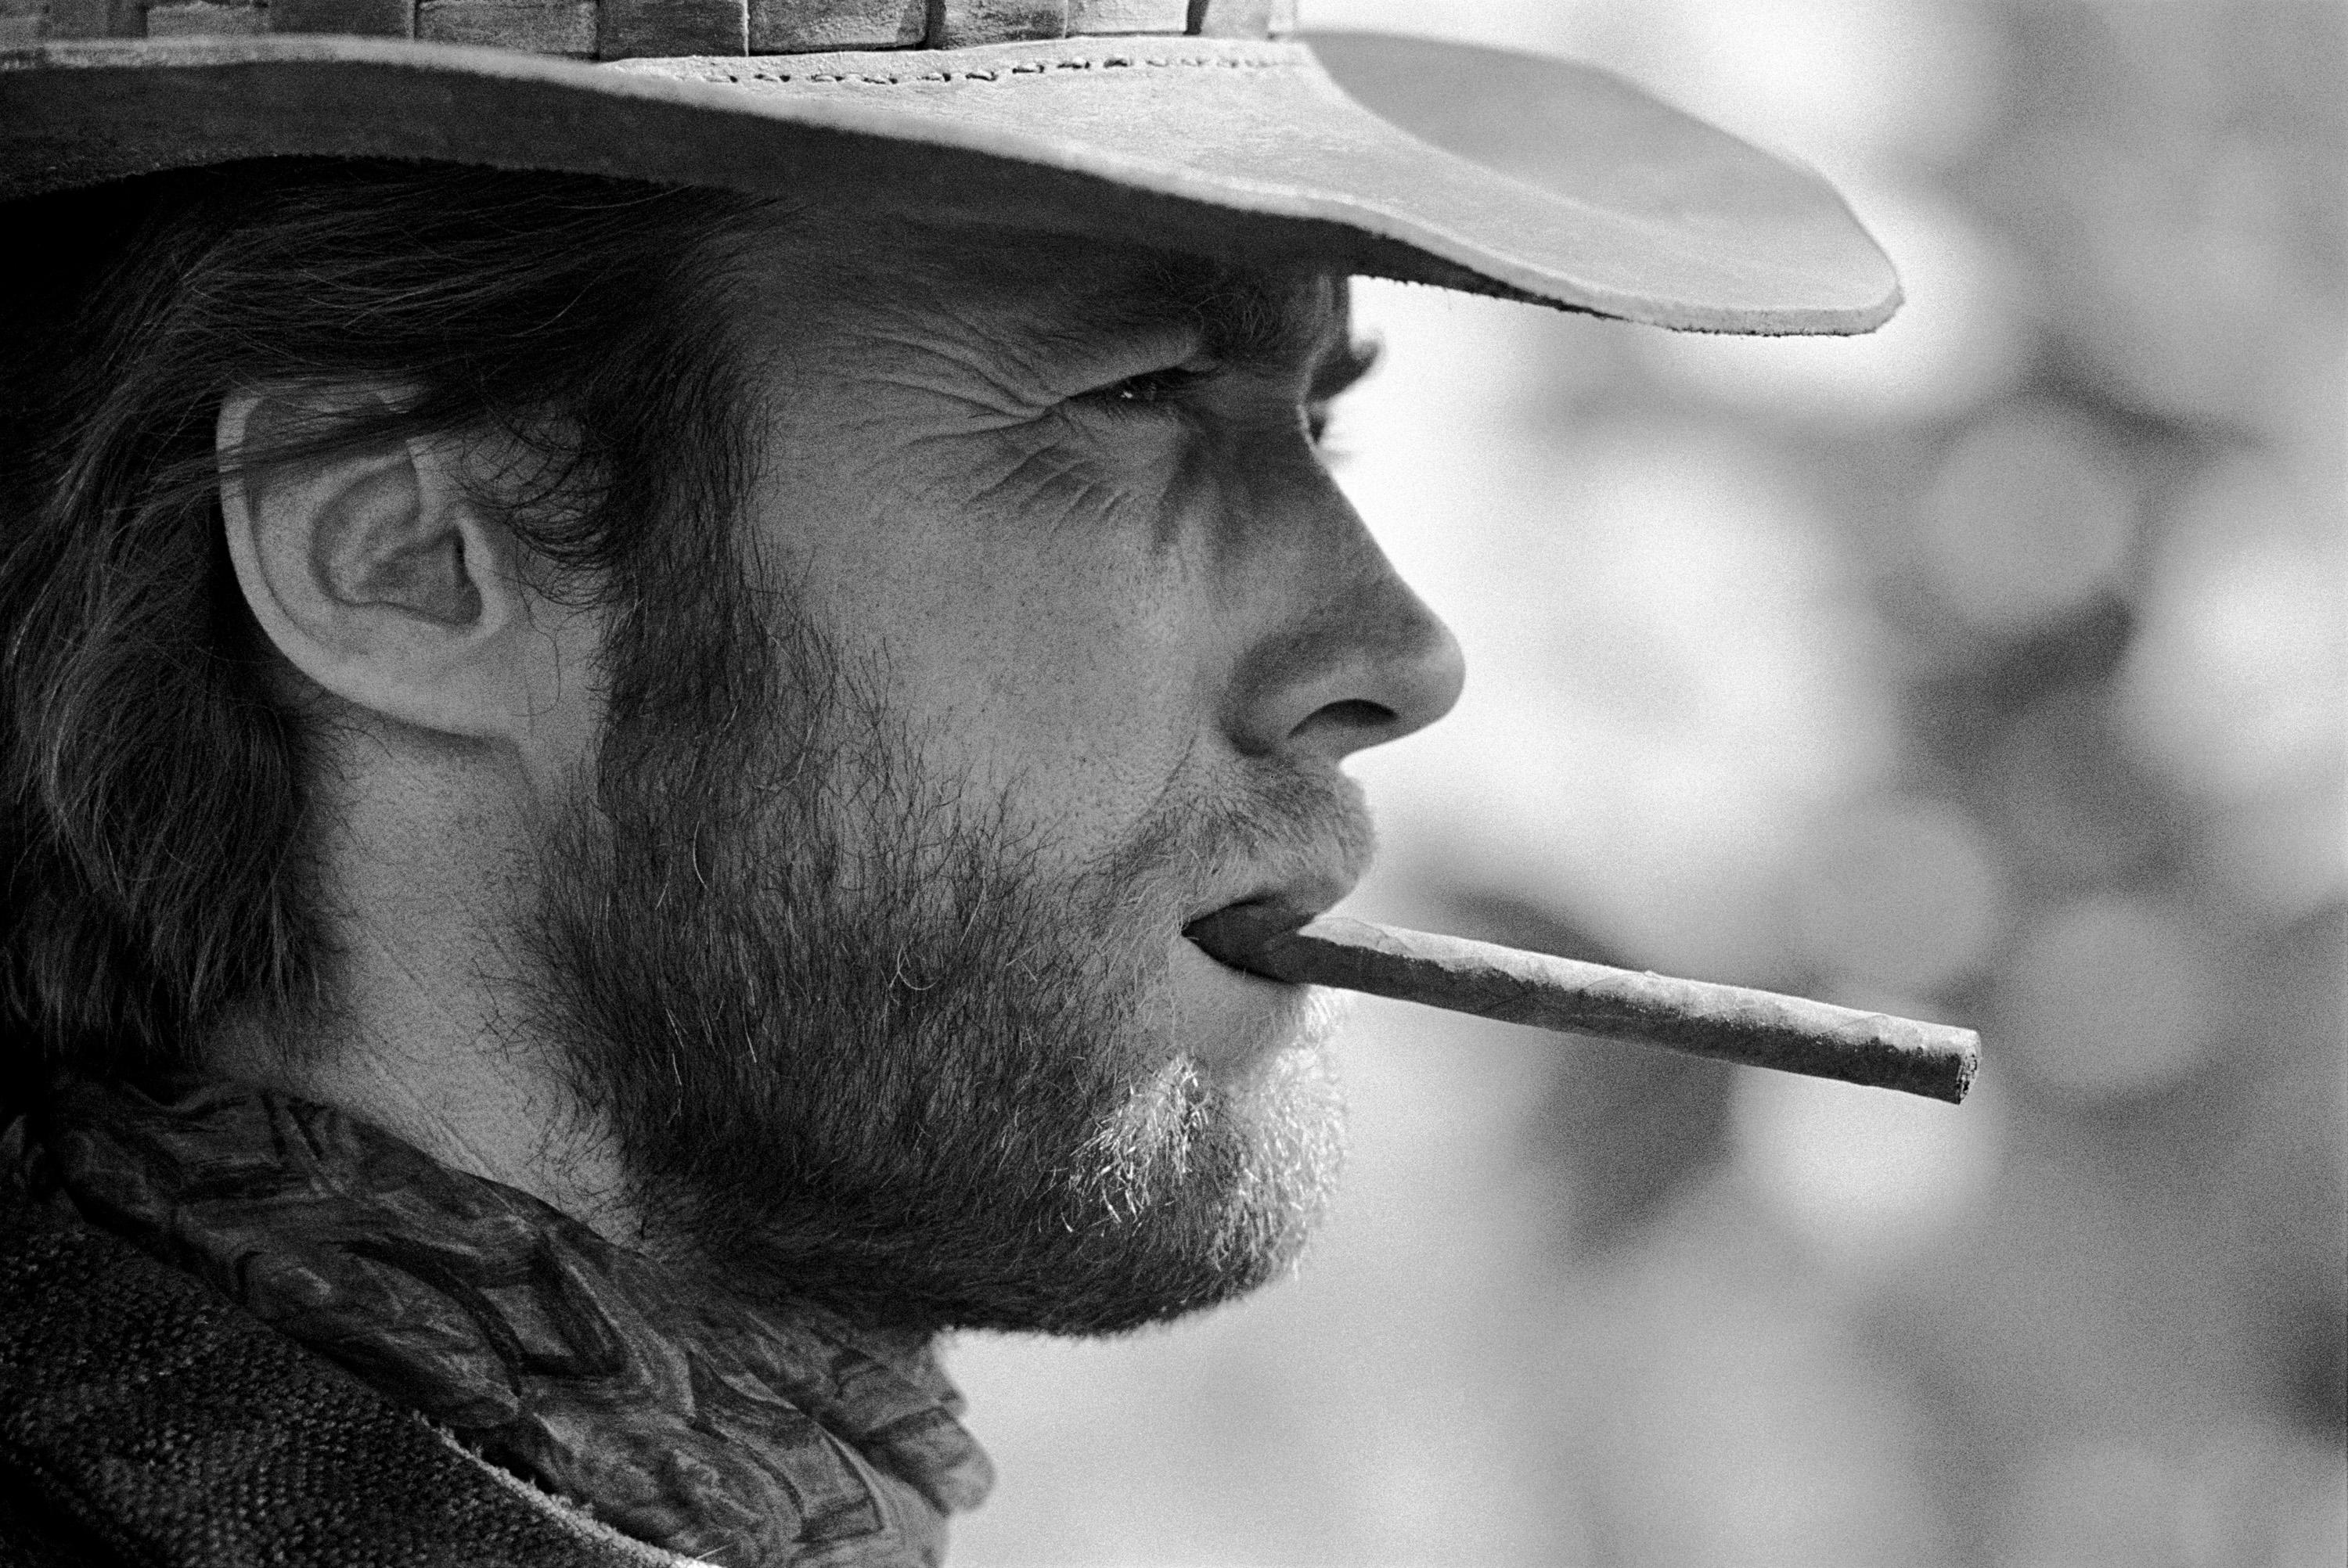 'Clint Eastwood, 1970' by American photographer, Lawrence Schiller. Archival digital print, EP 3/5. Image: 12.5 x 19 in. / Paper: 16 x 20 in. From the set of the movie 'Two Mules for Sister Sara' this black and white photograph features a side